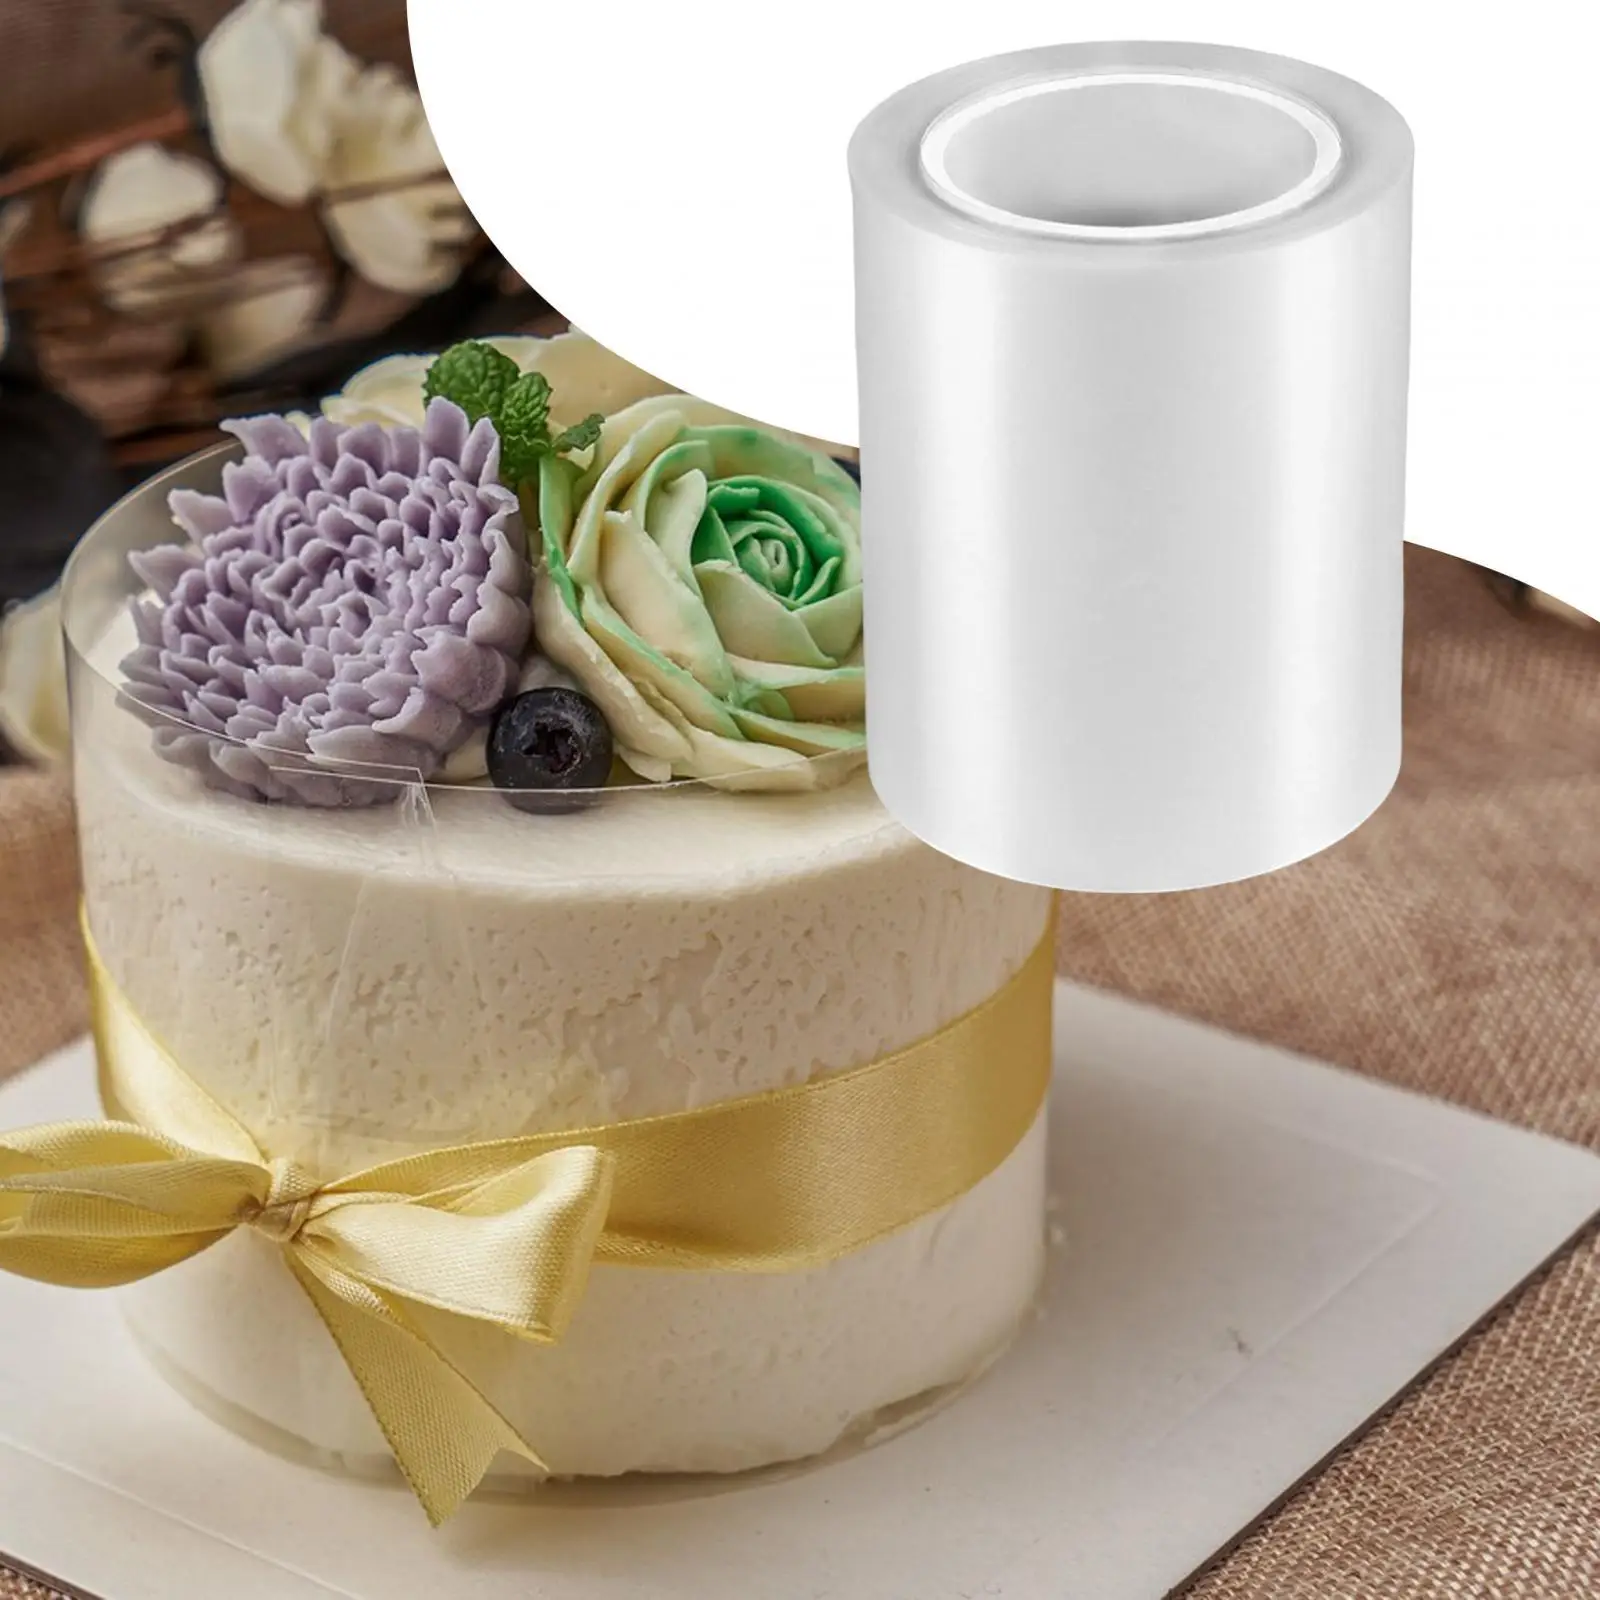 Cake Collars Transparent Cake Rolls for Chocolate Kitchen Mousse Baking